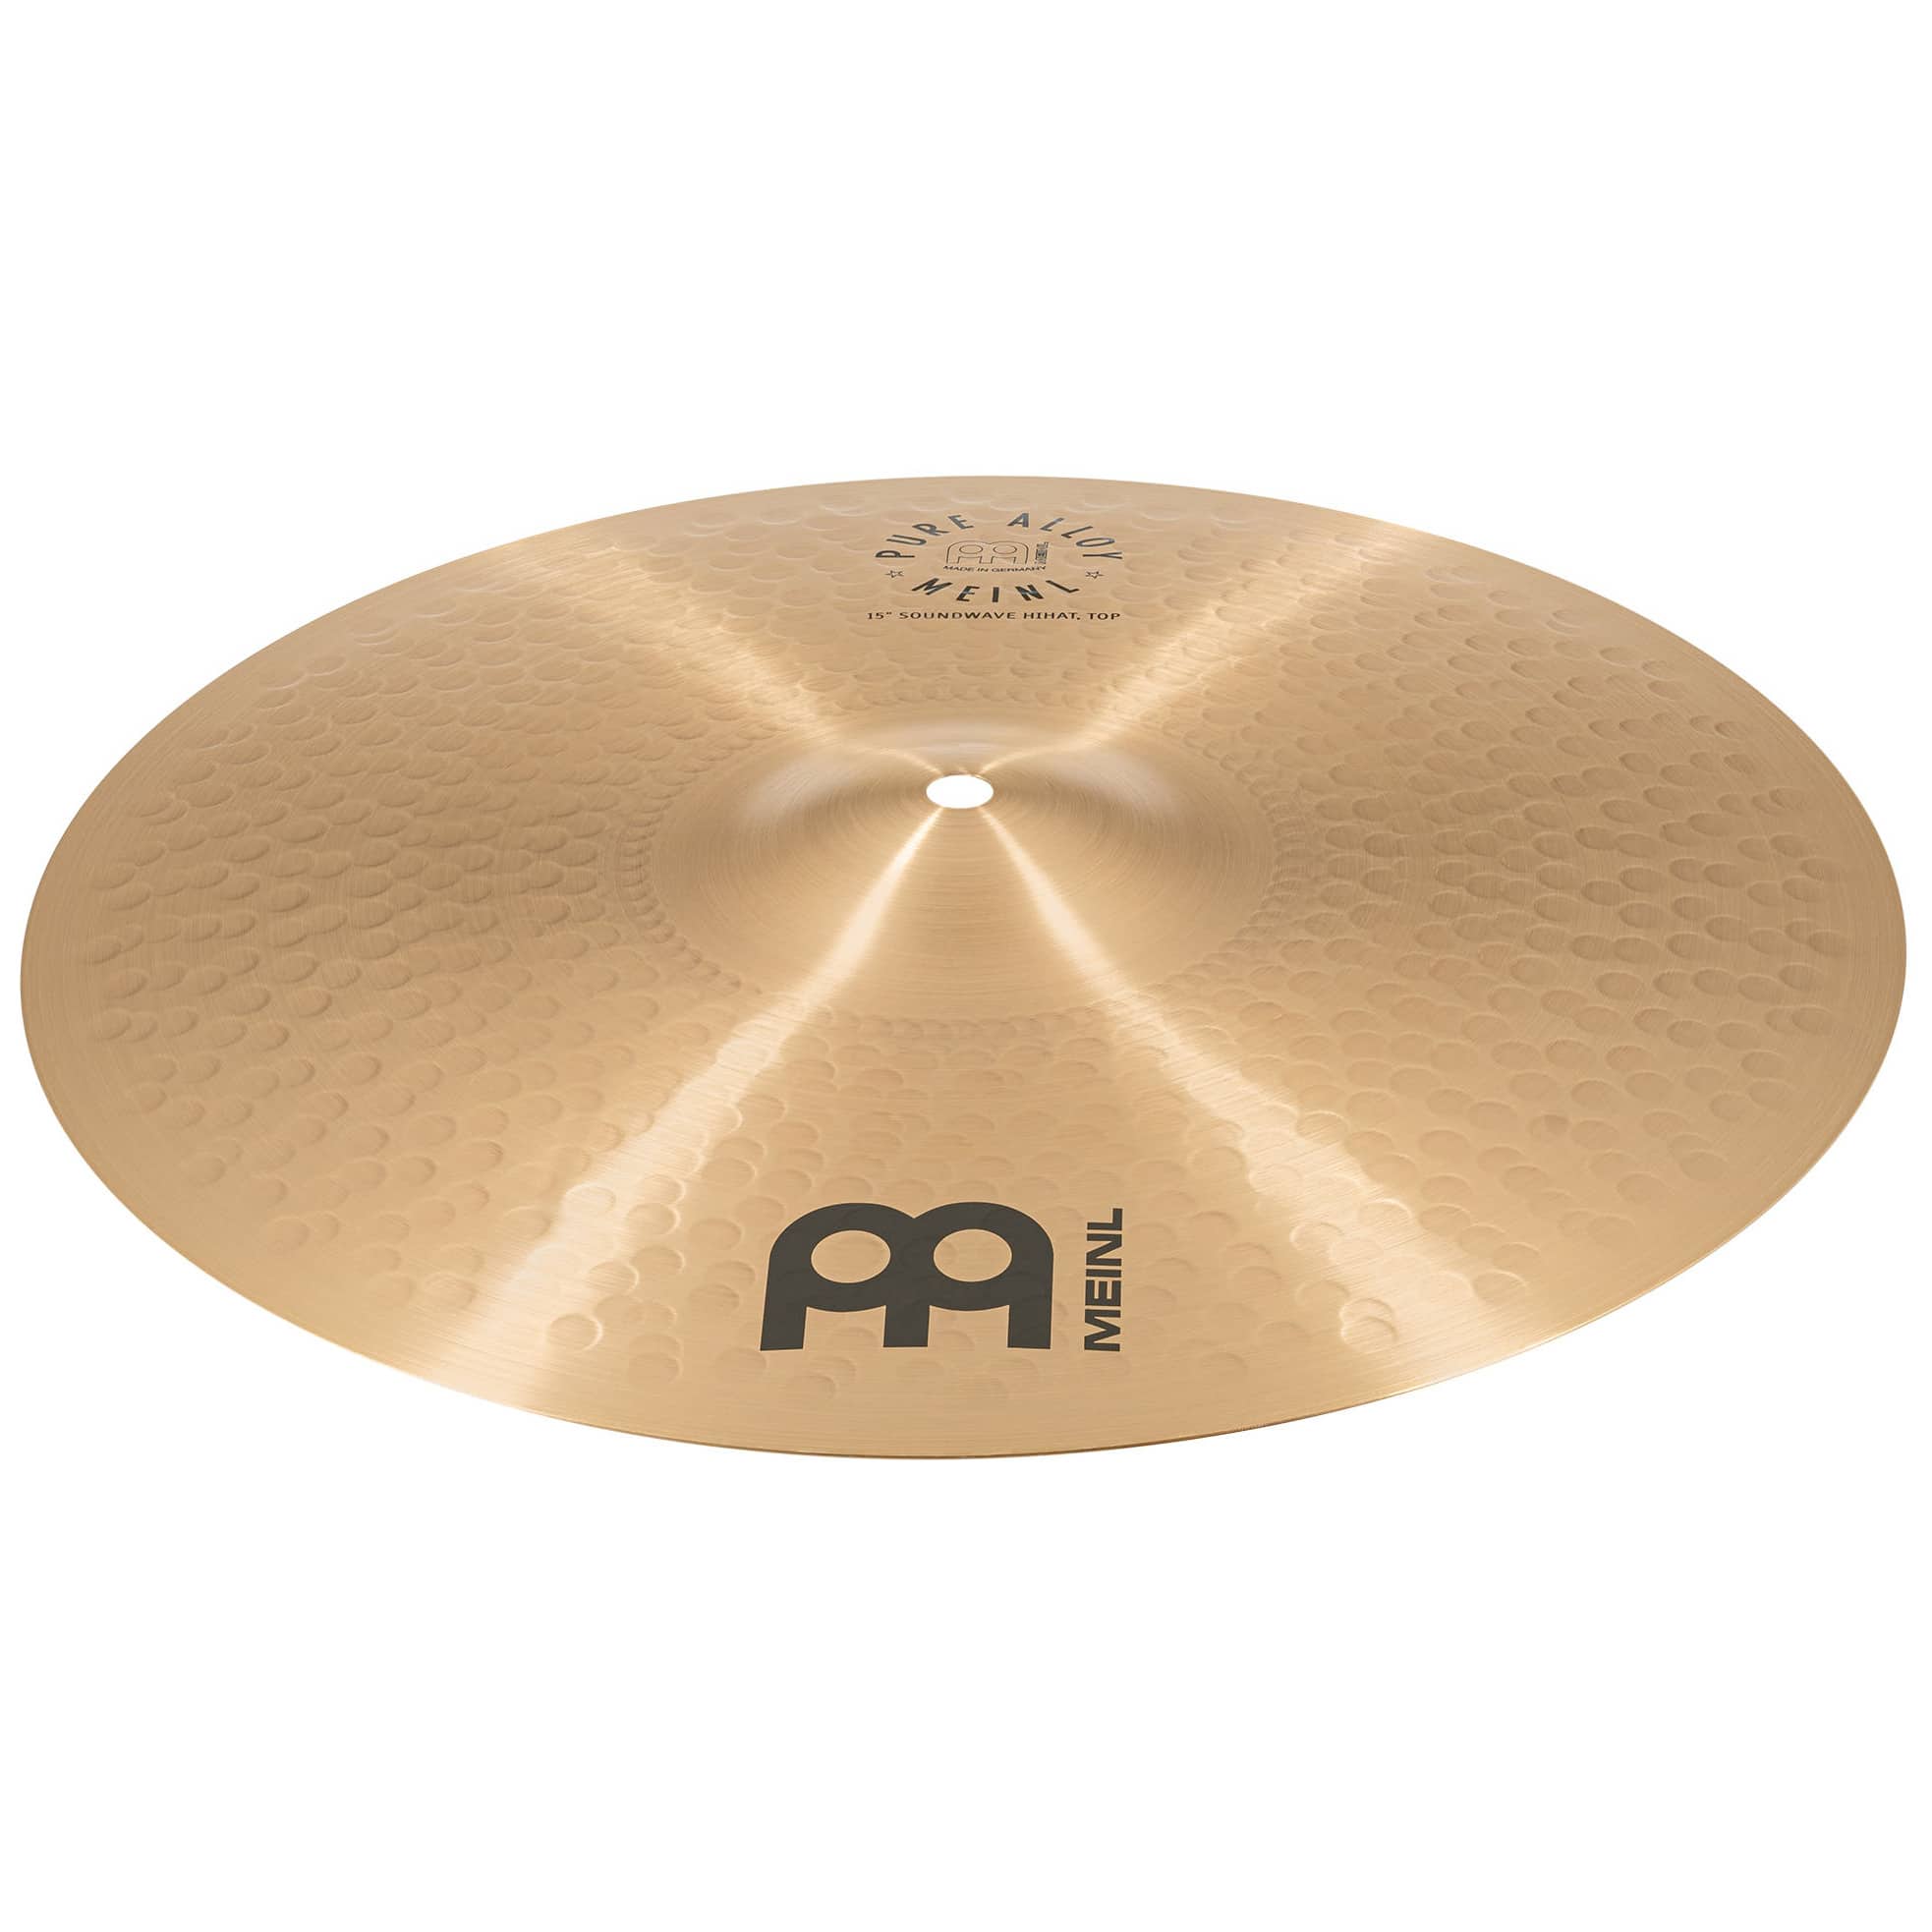 Meinl Cymbals PA15SWH - 15" Pure Alloy Soundwave Hihat 4